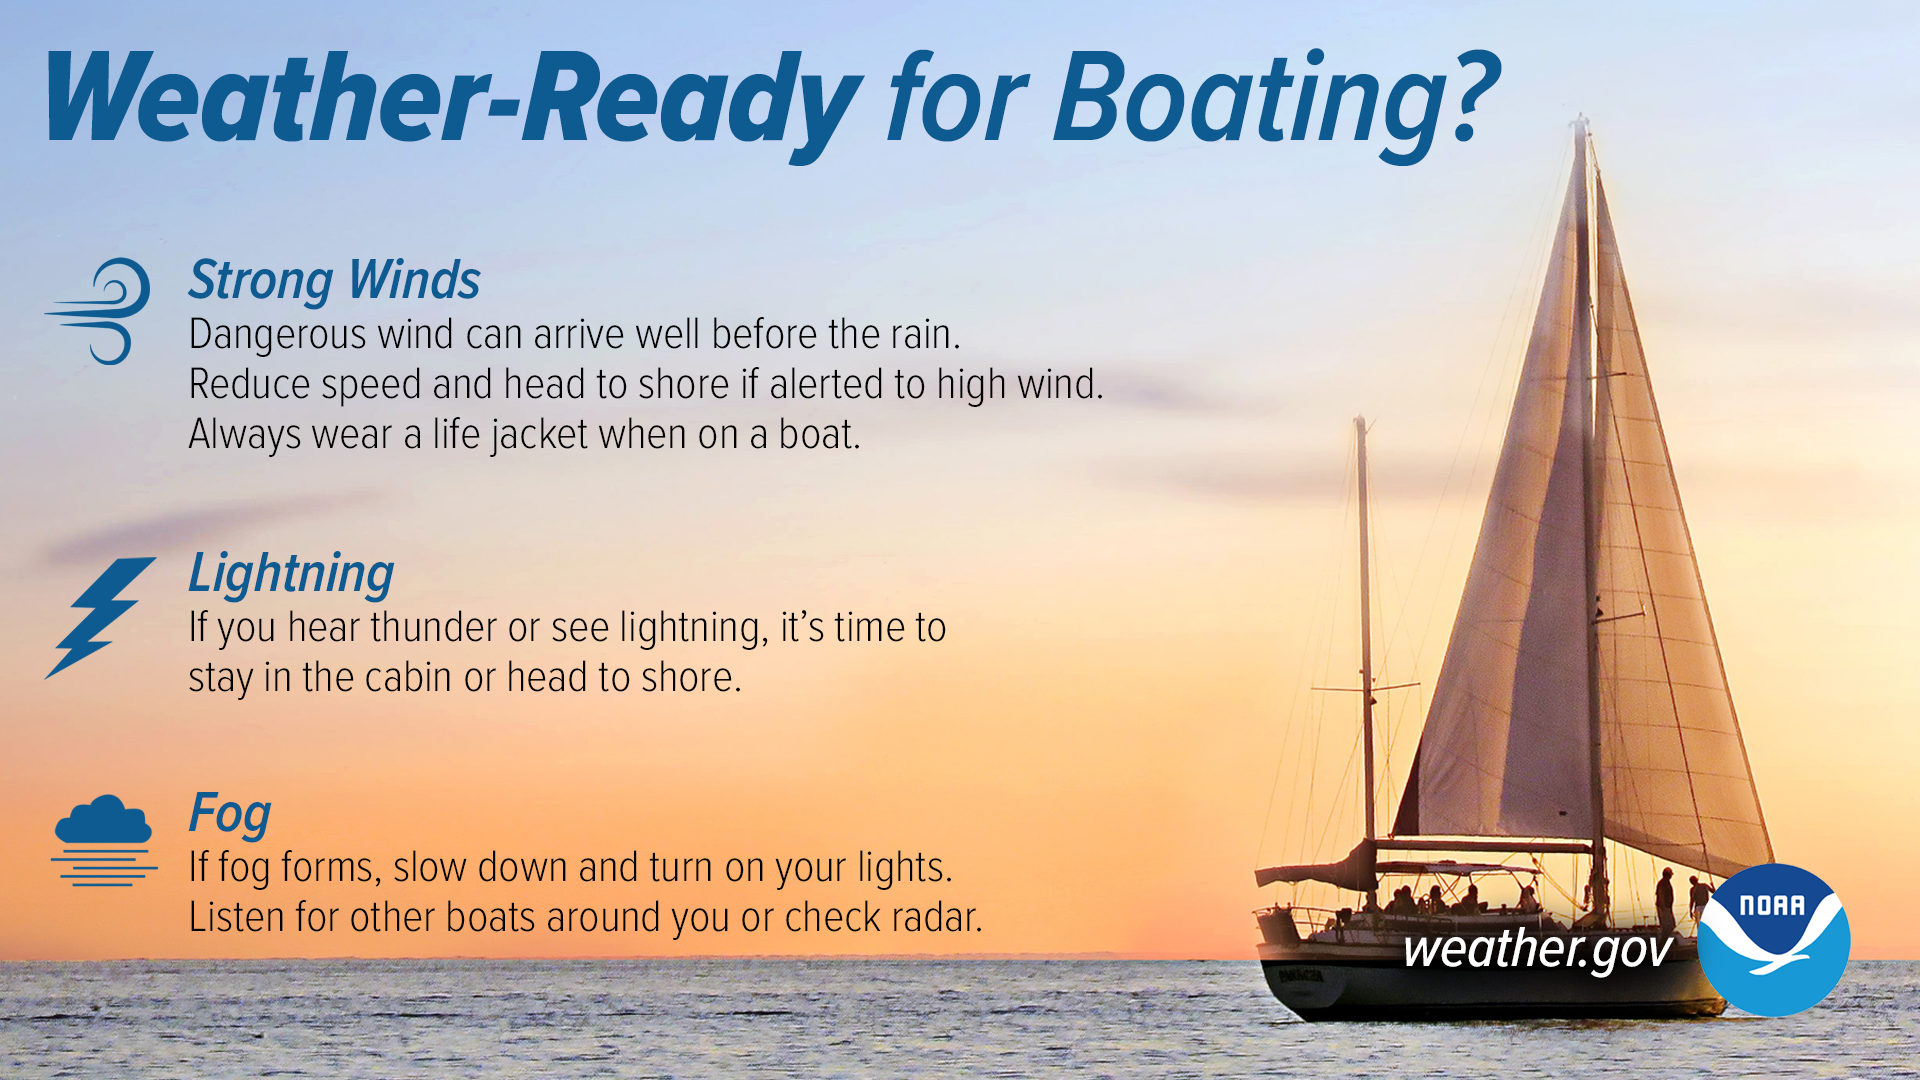 Weather-Ready for Boating? 1. Strong Winds: Dangerous wind can arrive well before the rain. Reduce speed and head to shore if alerted to high wind. Always wear a life jacket when on a boat. 2. Lightning: If you hear thunder or see lightning, it's time to stay in the cabin or head to shore. 3. Fog: If fog forms, slow down and turn on your lights. Listen for other boats around you or check radar.